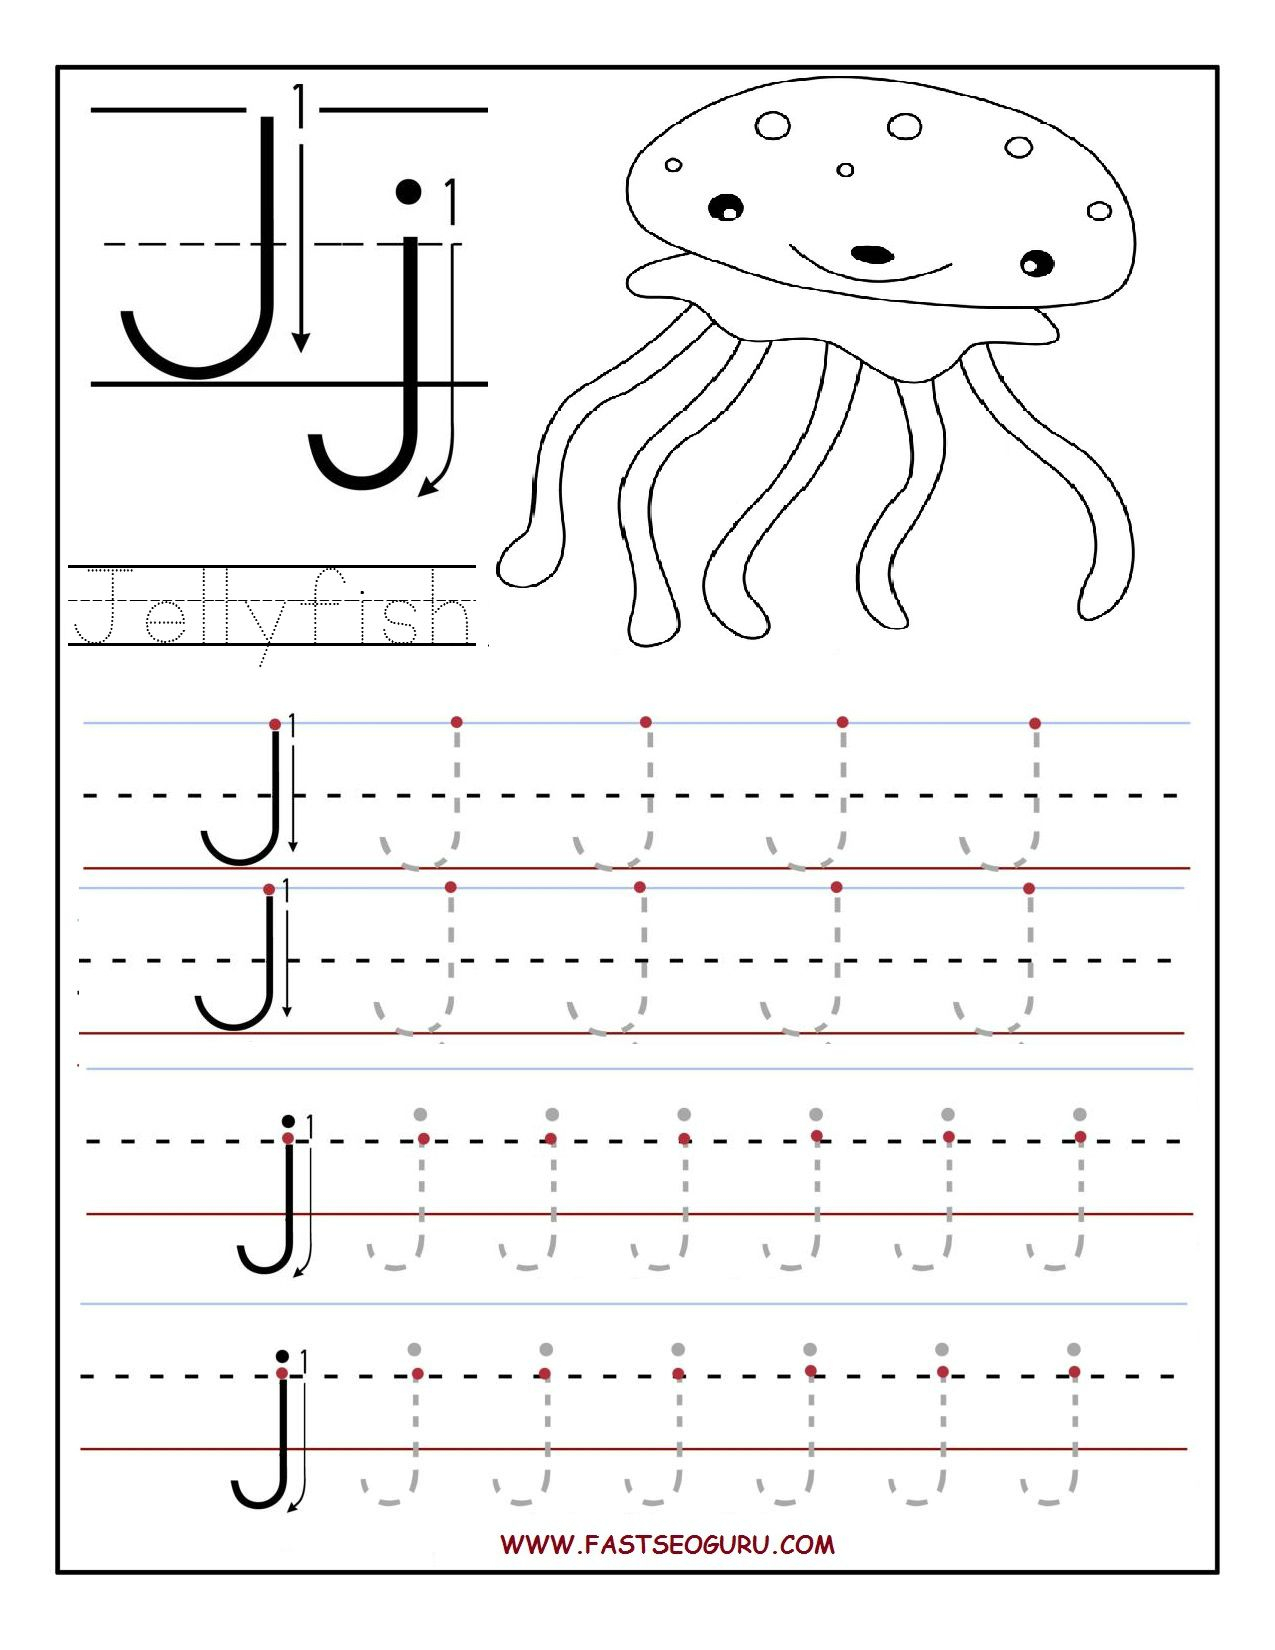 Printable Letter J Tracing Worksheets For Preschool pertaining to Letter J Tracing Page